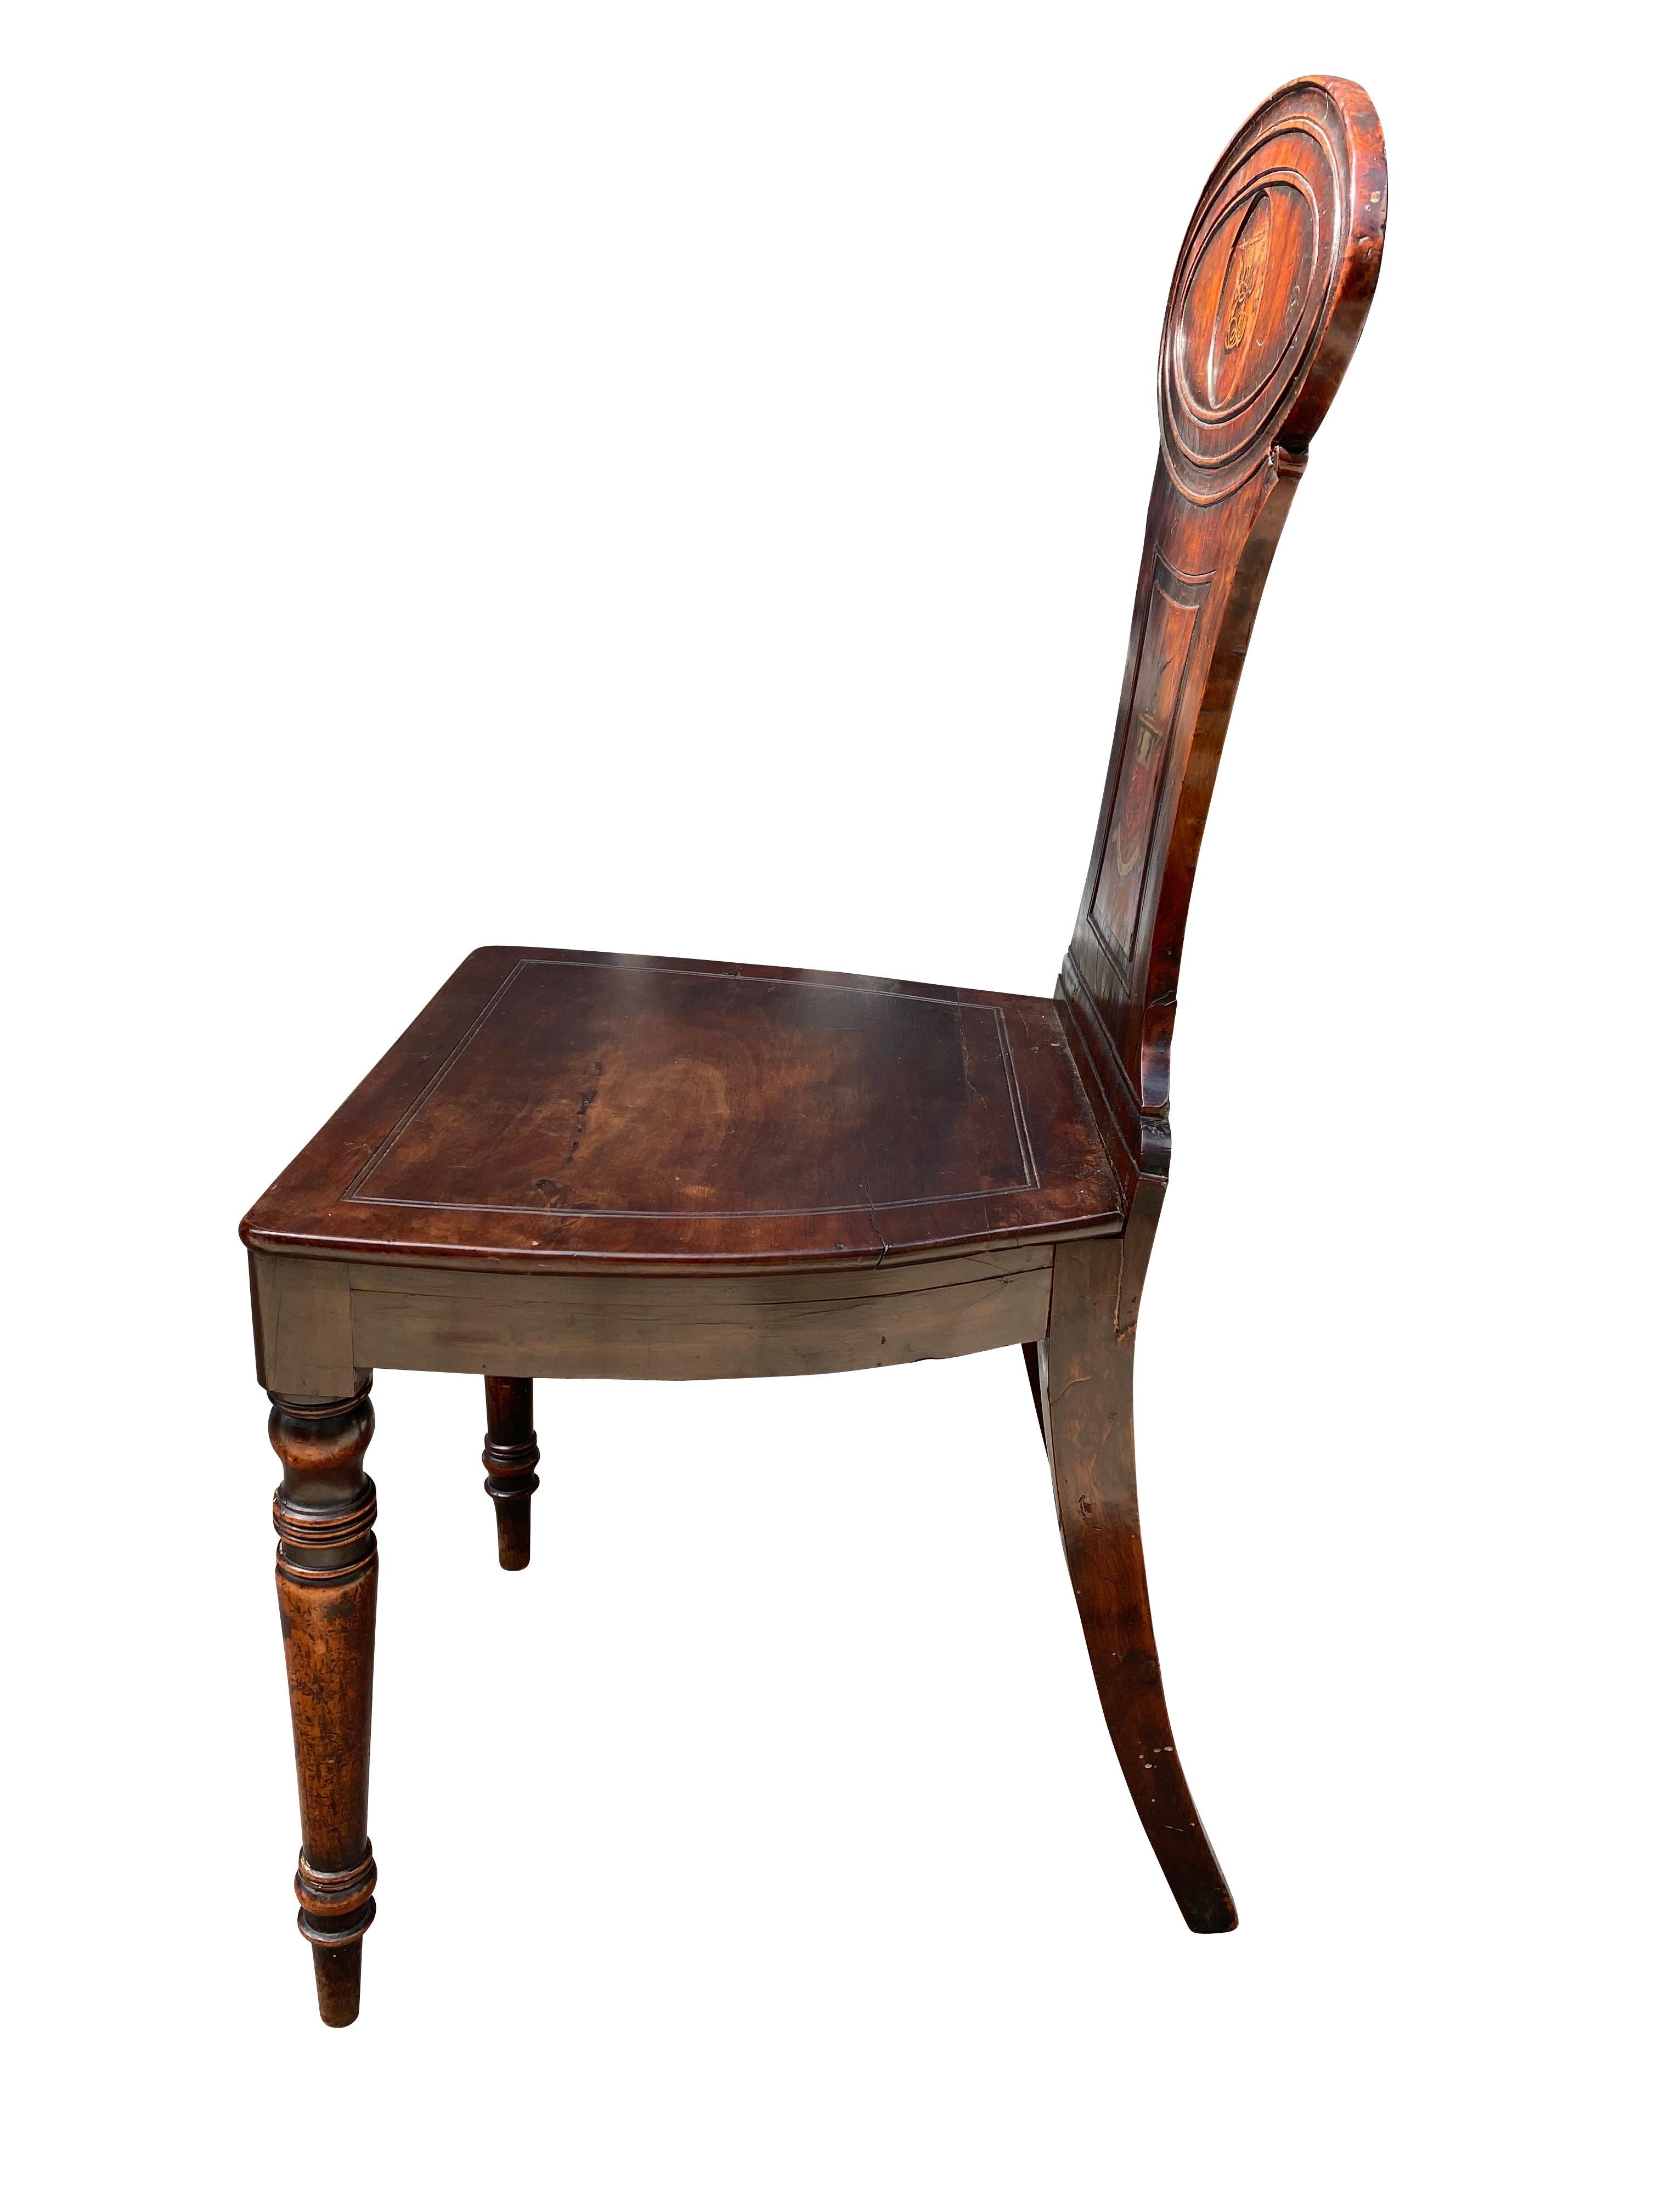 English Regency Mahogany Hall Chair with Armorial Crest For Sale